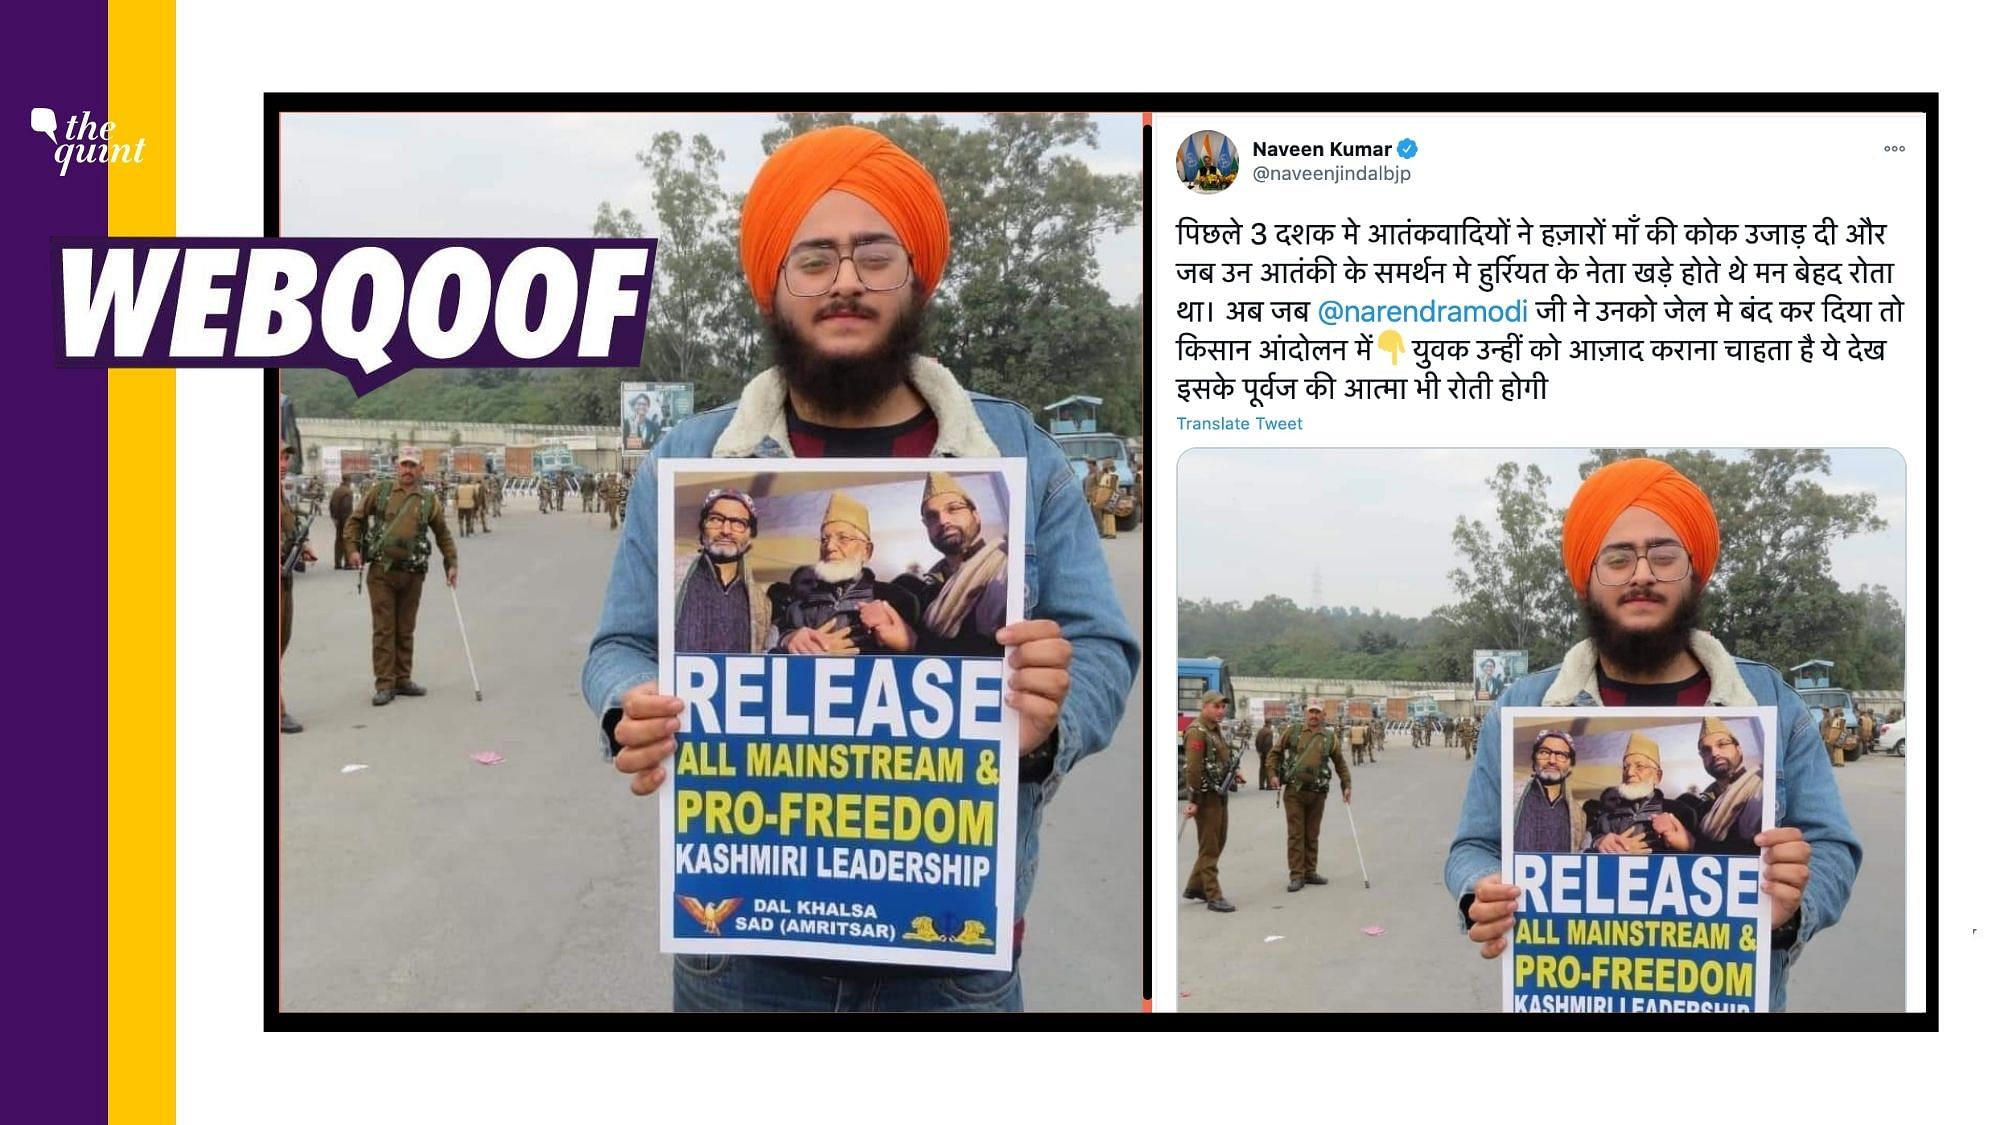 An old photo from December 2019 was revived to falsely claim that it’s from the ongoing farmers’ protest.